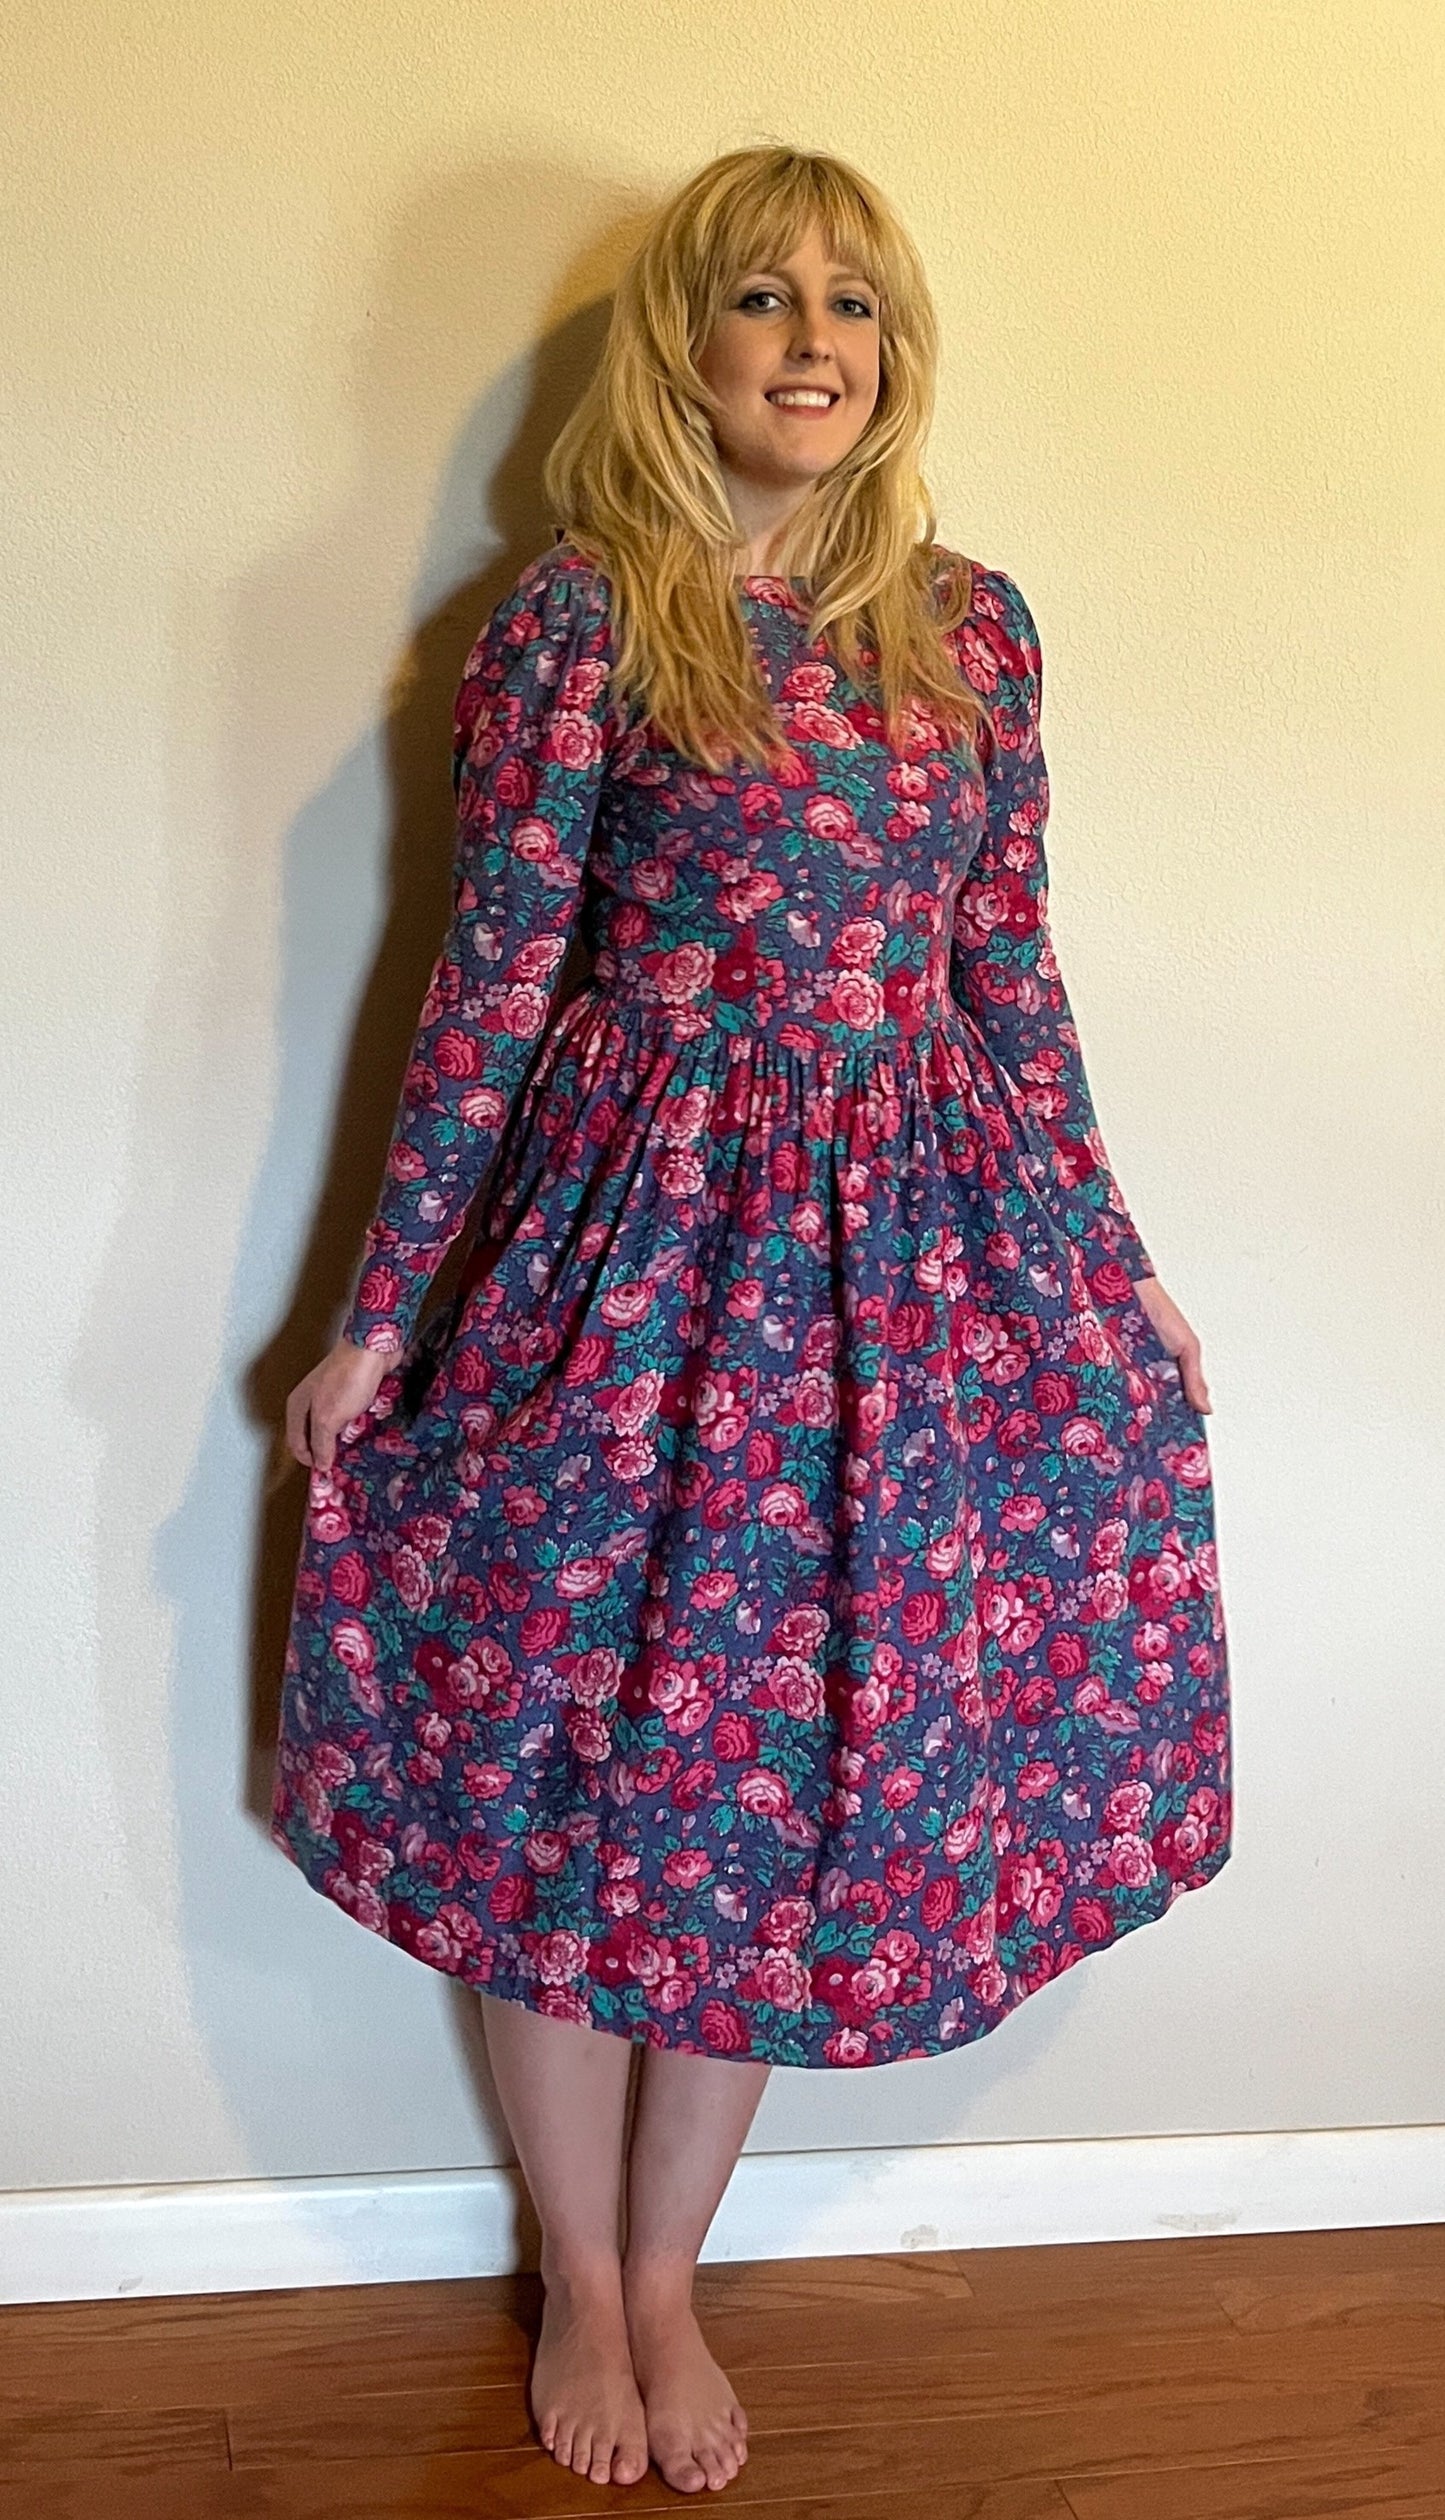 Vintage 1980's "Laura Ashley" Pink & Red Floral Long Sleeve Dress